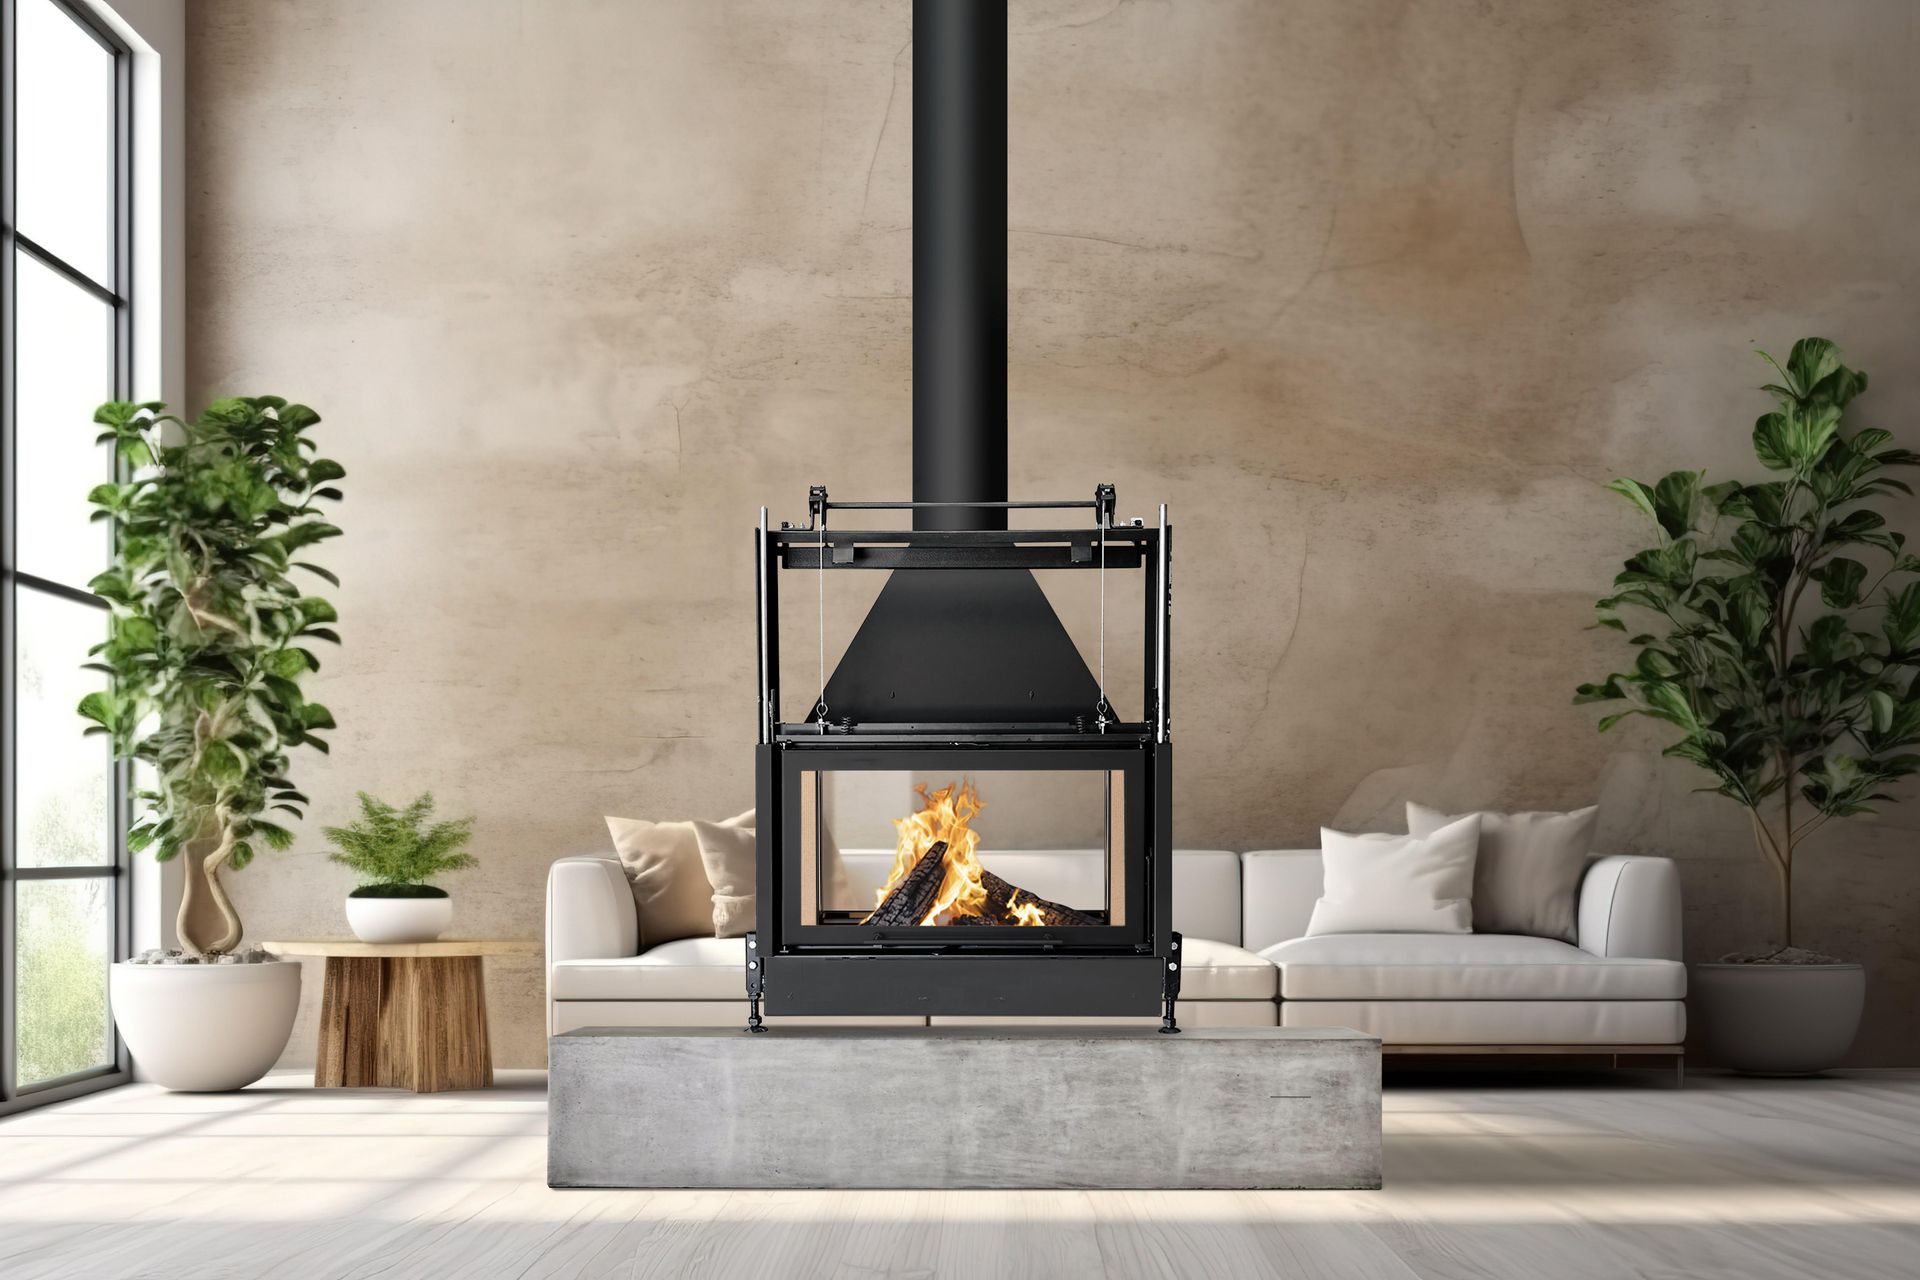 The Rebellion Tunnel 970 insert provides elegance and pleasing aesthetics with it's large vertical glass doors, allowing for the perfect view of your crackling log fire.